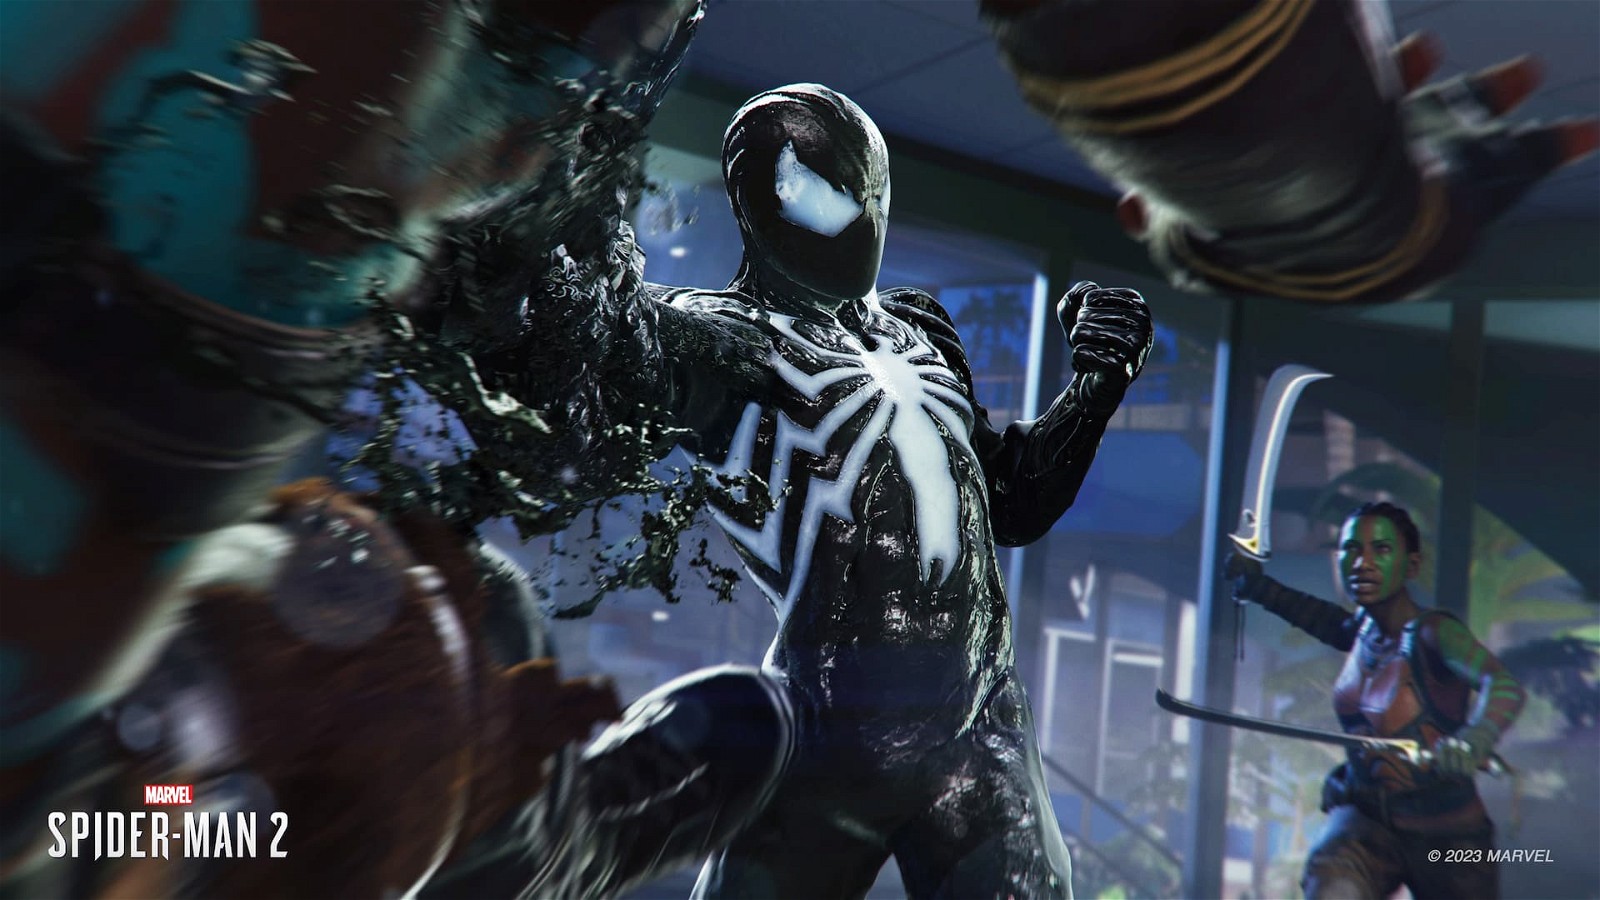 A leaker claims to have platinumed Spider-Man 2 in only 30 hours.